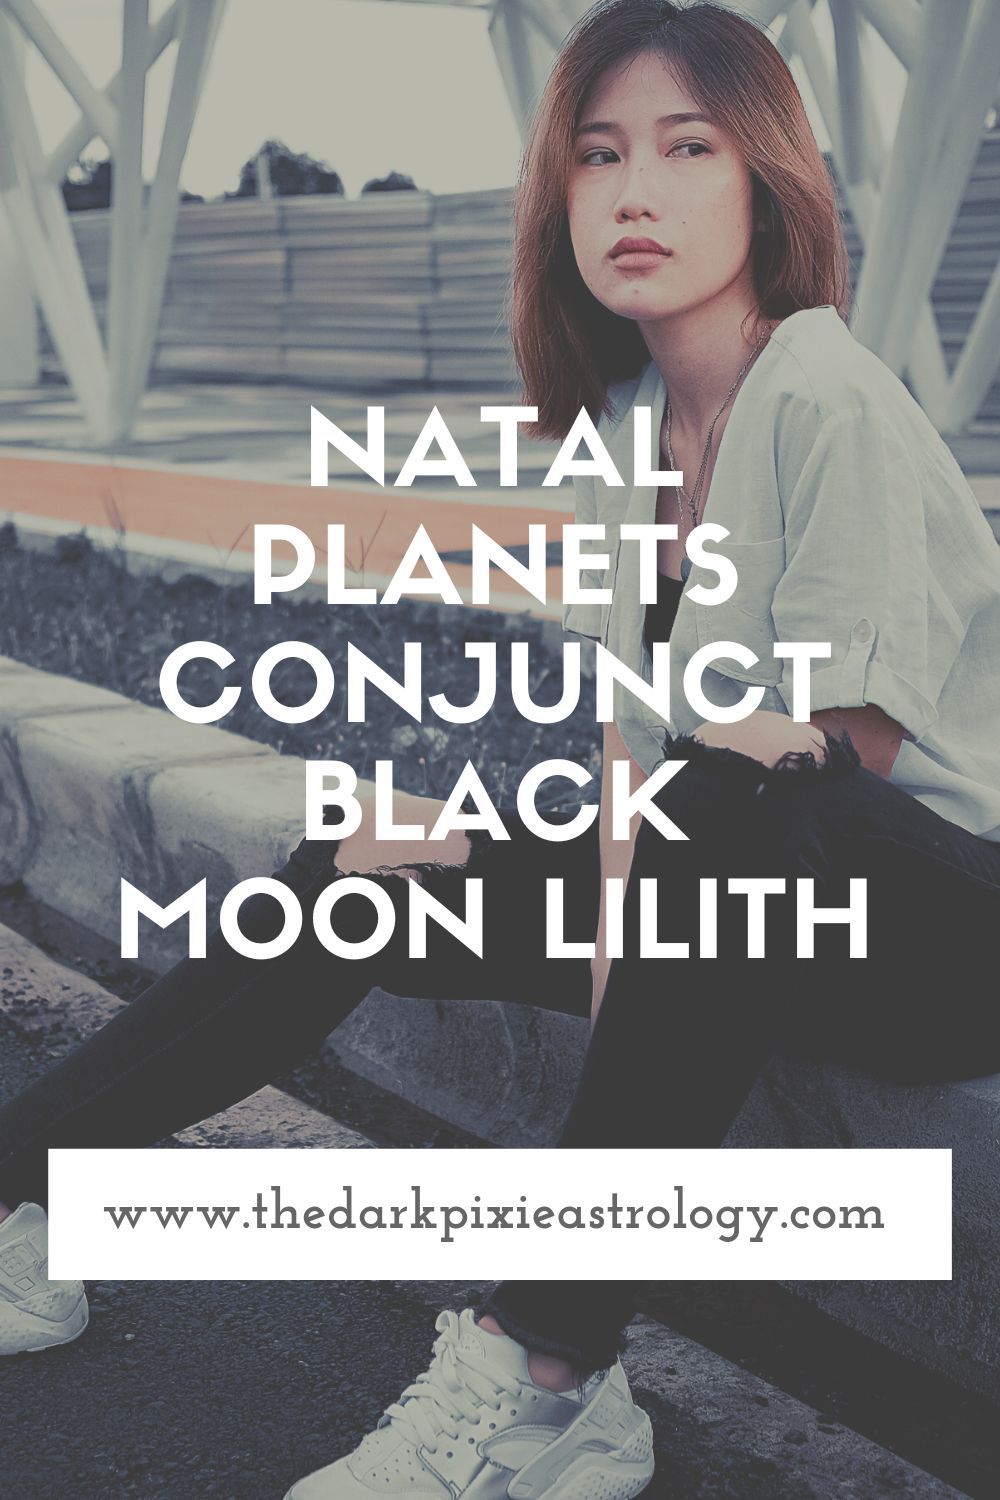 Natal Planets Conjunct Black Moon Lilith - The Dark Pixie Astrology